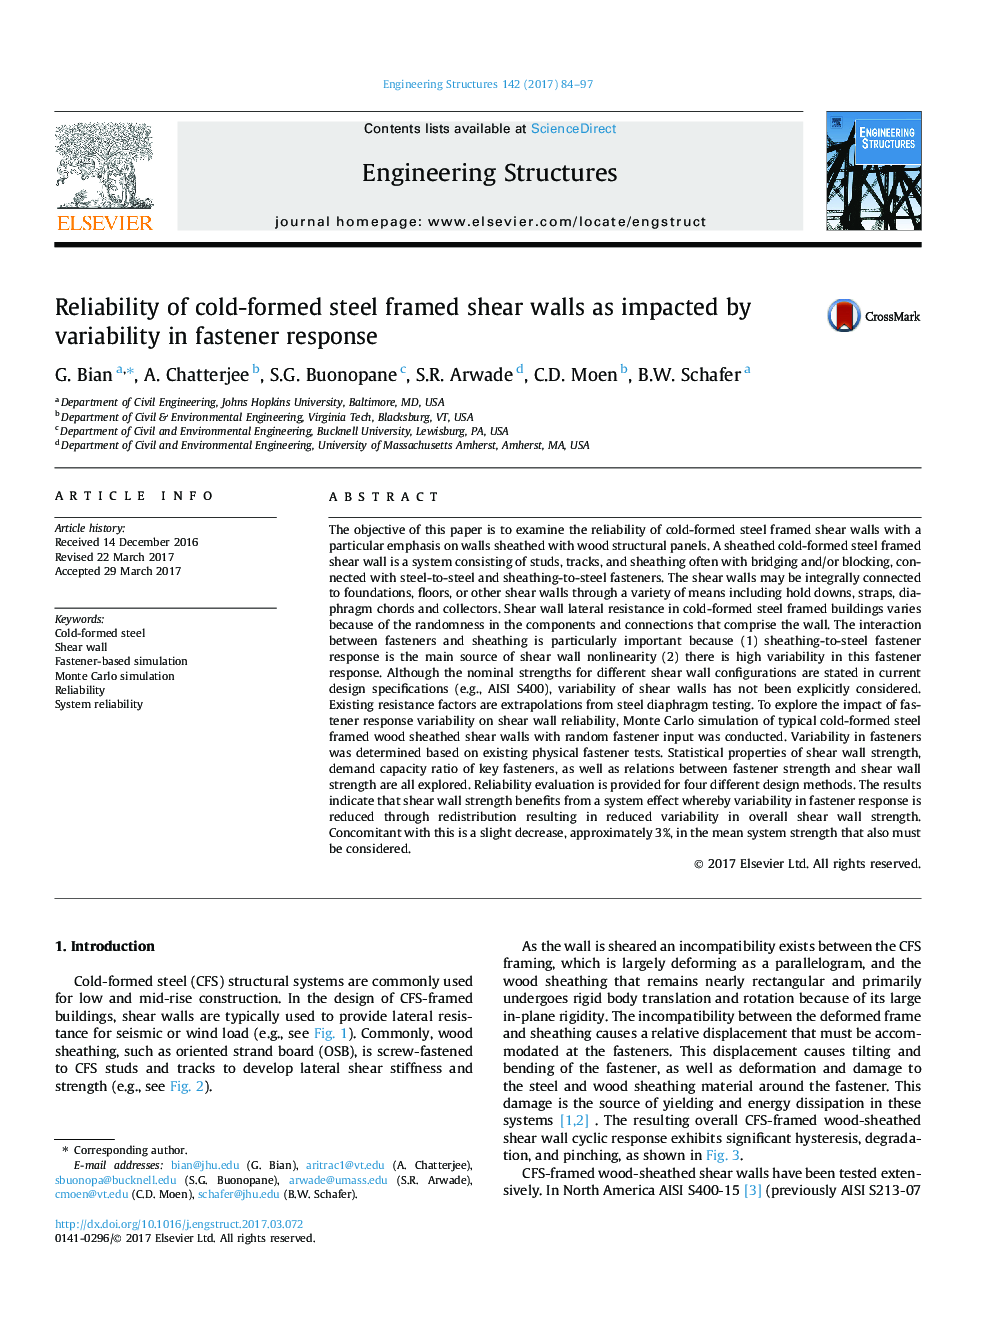 Reliability of cold-formed steel framed shear walls as impacted by variability in fastener response